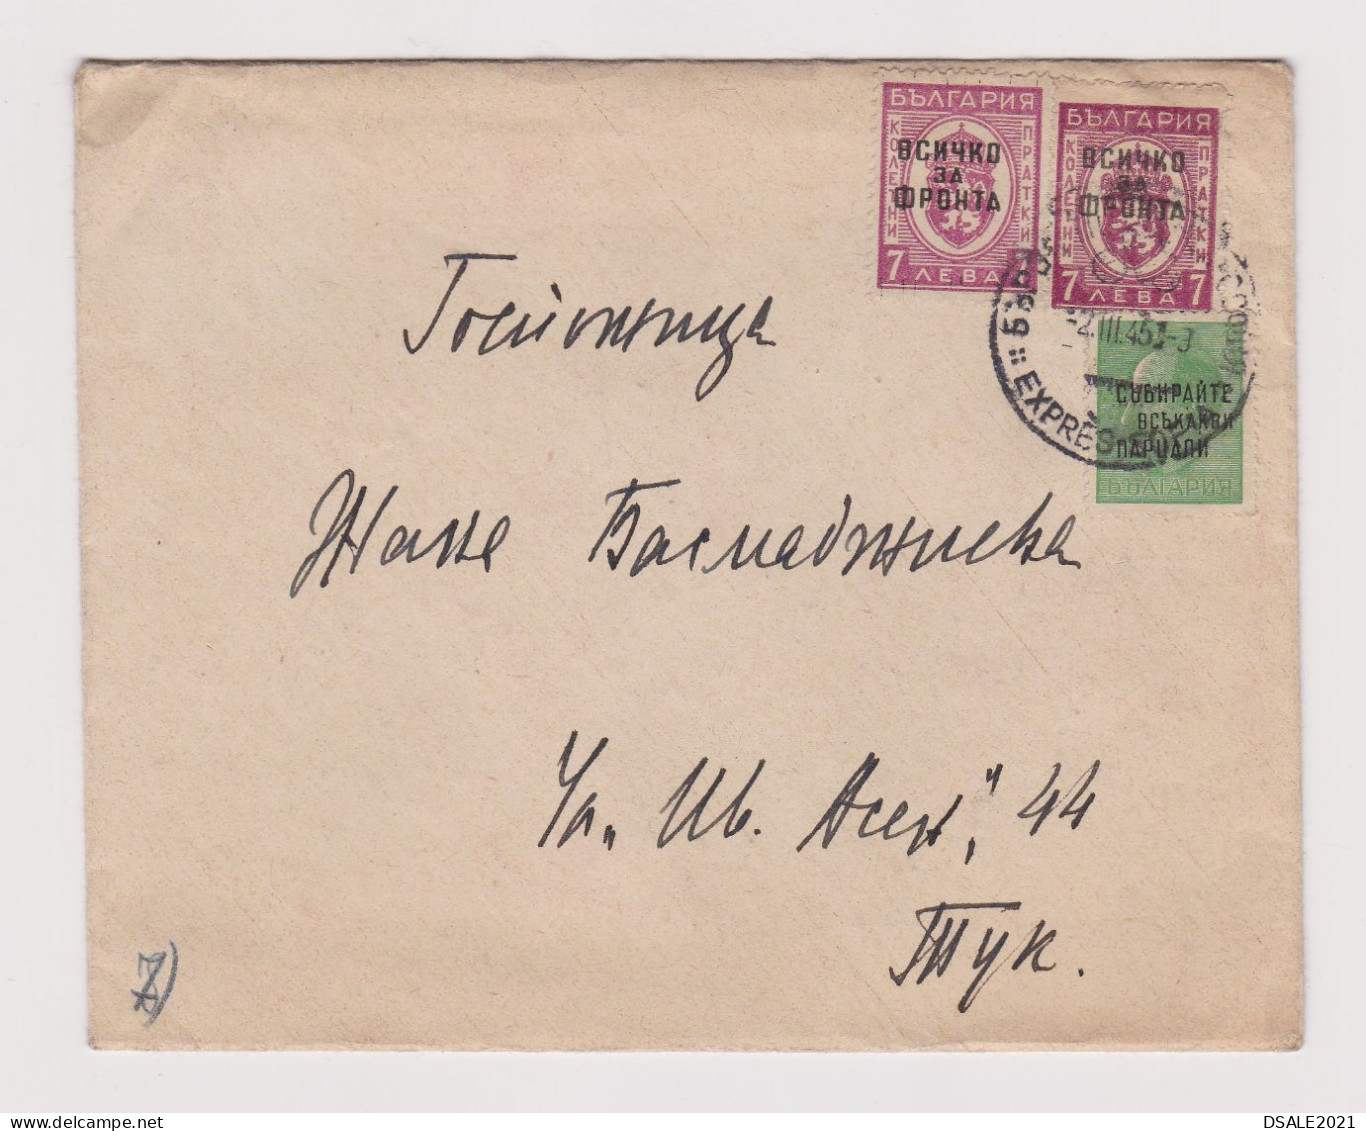 Bulgaria Bulgarie Bulgarien 1945 SOFIA EXPRESS Cover W/Rare 2x7Lv.+1Lv. Overprint Stamps Mixed Franking, Domestic /66223 - Covers & Documents